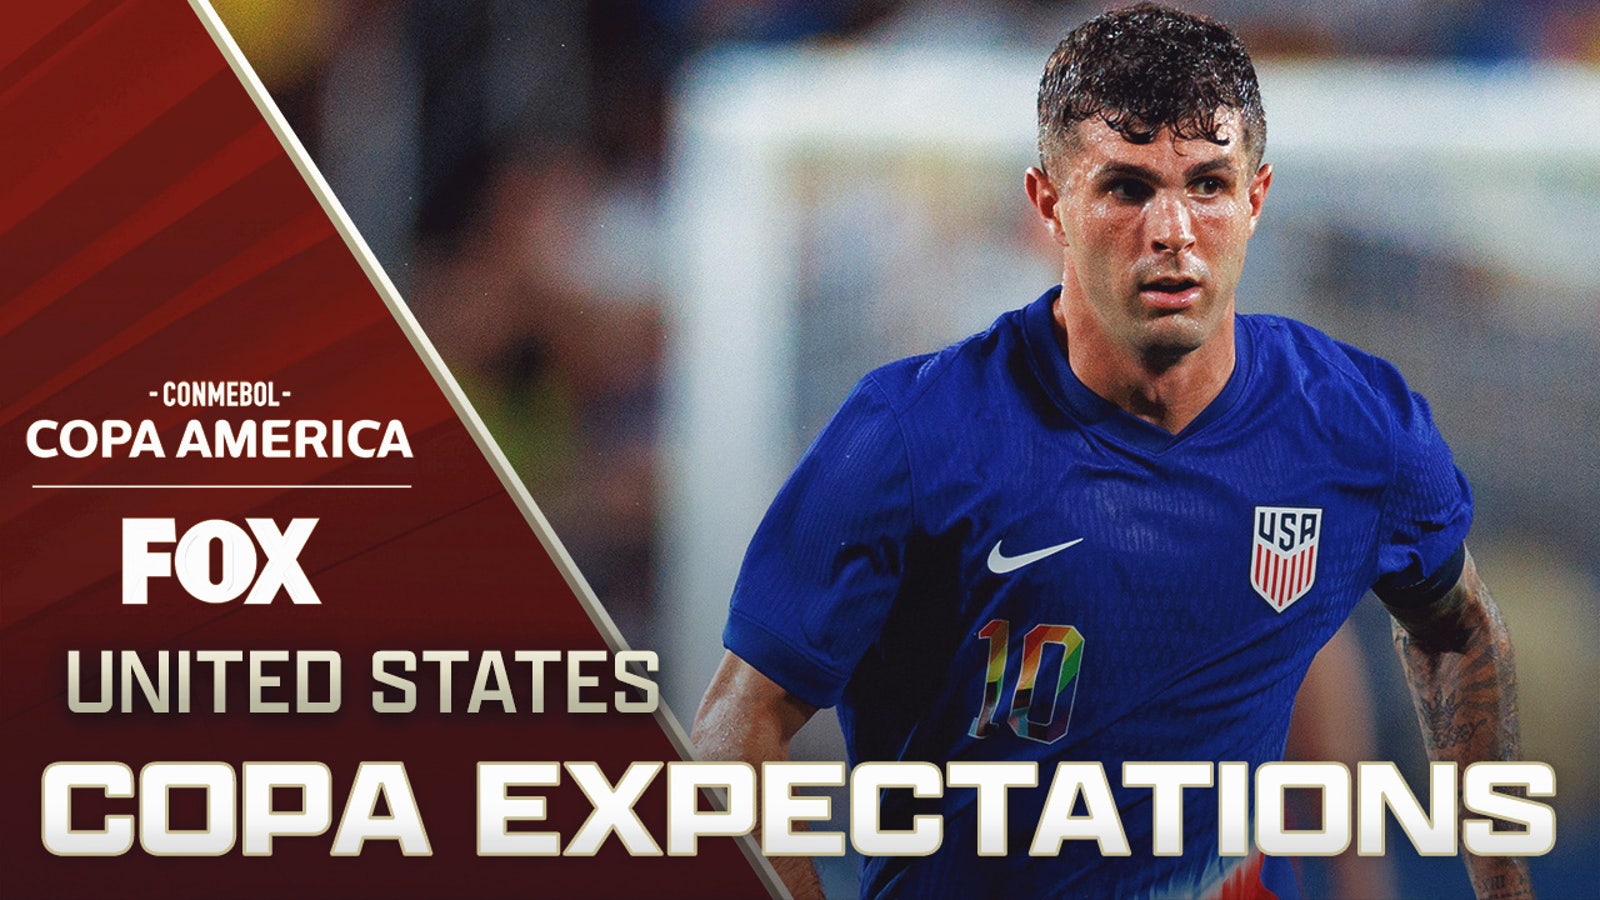 USMNT's Copa América expectations and if they will exceed them